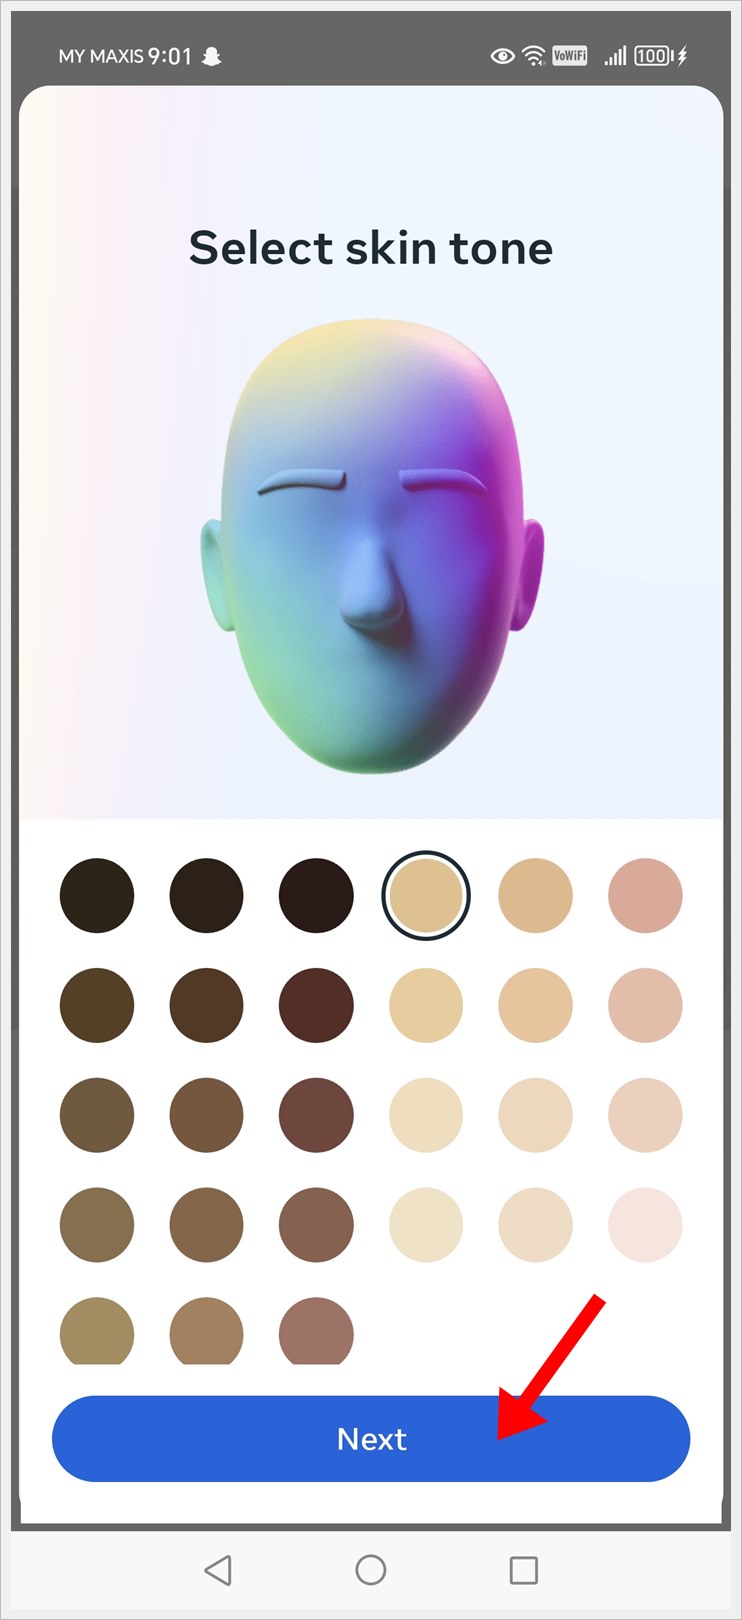 Select skin tone and tap on the 'Next' button.